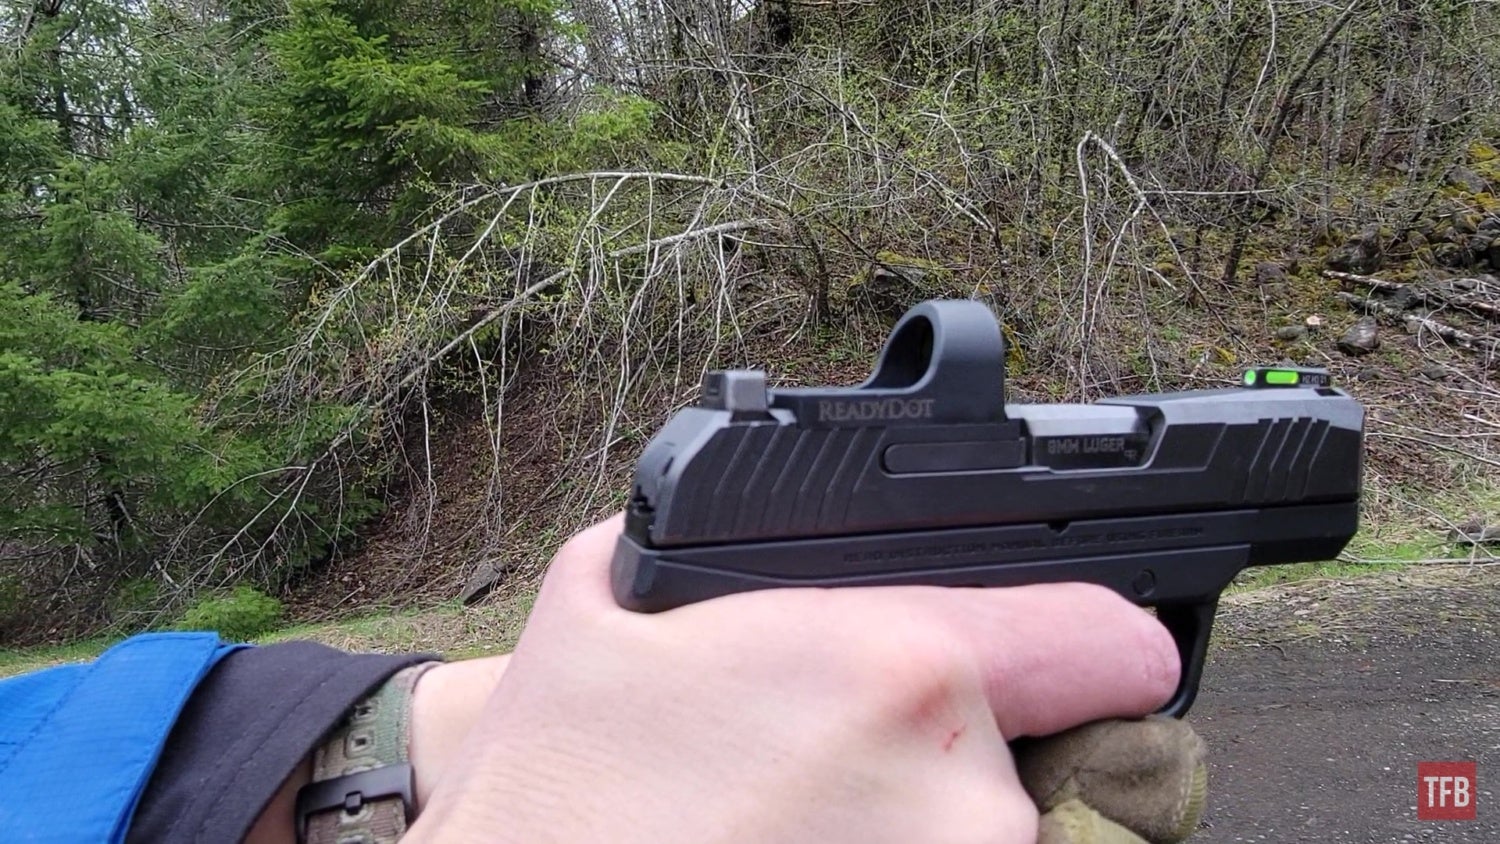 TFB Review: The Ruger ReadyDot - It's Not As Bad As You Think